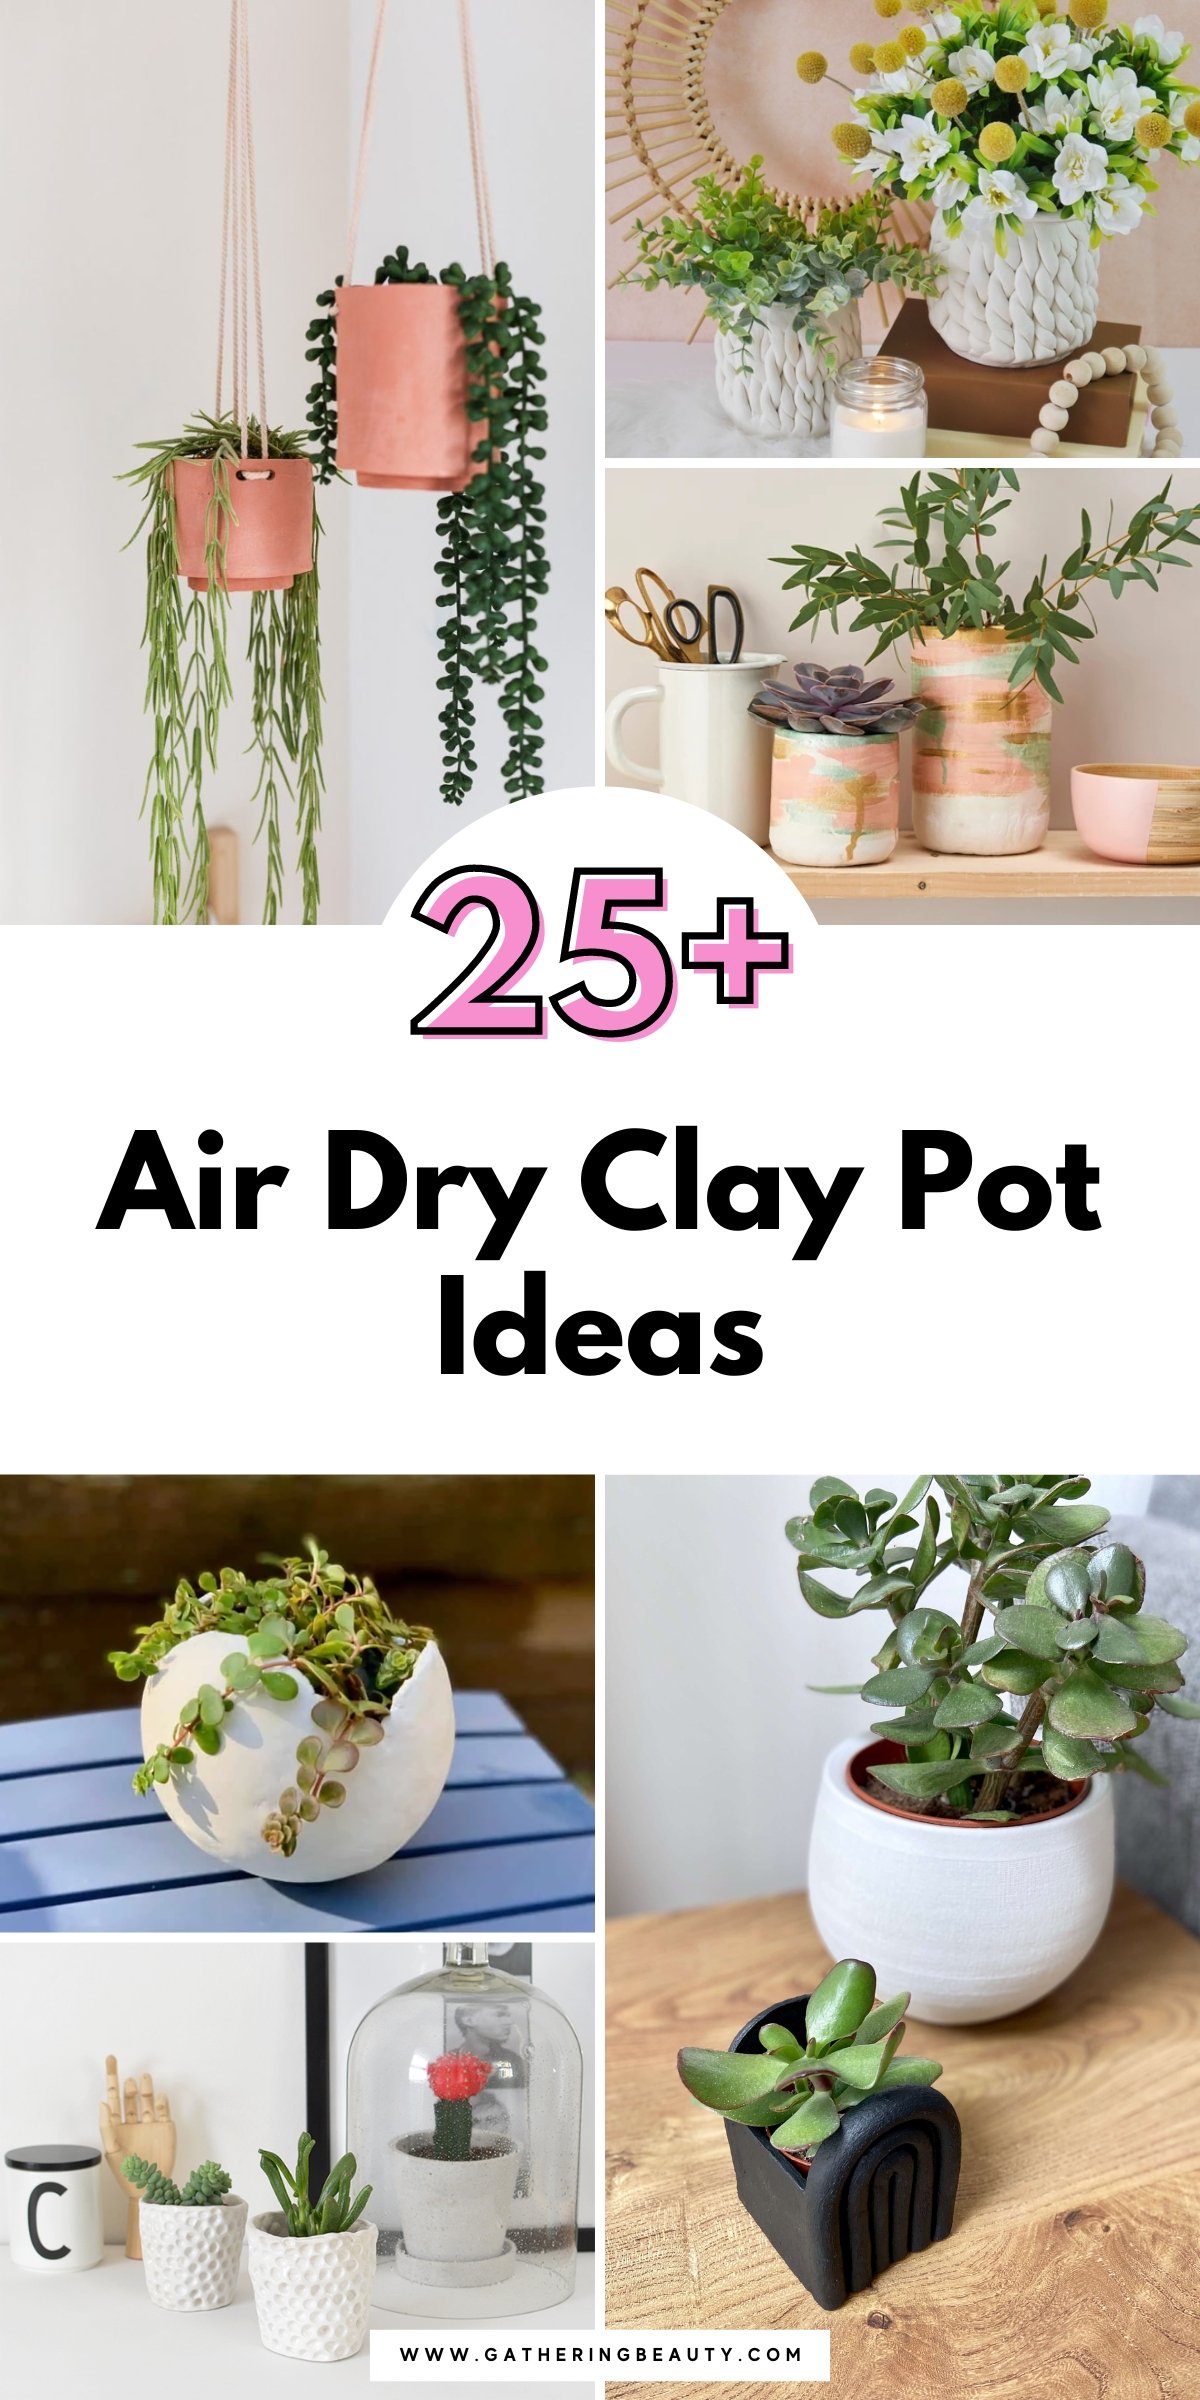 35 air dry clay ideas for adults and kids - Gathered